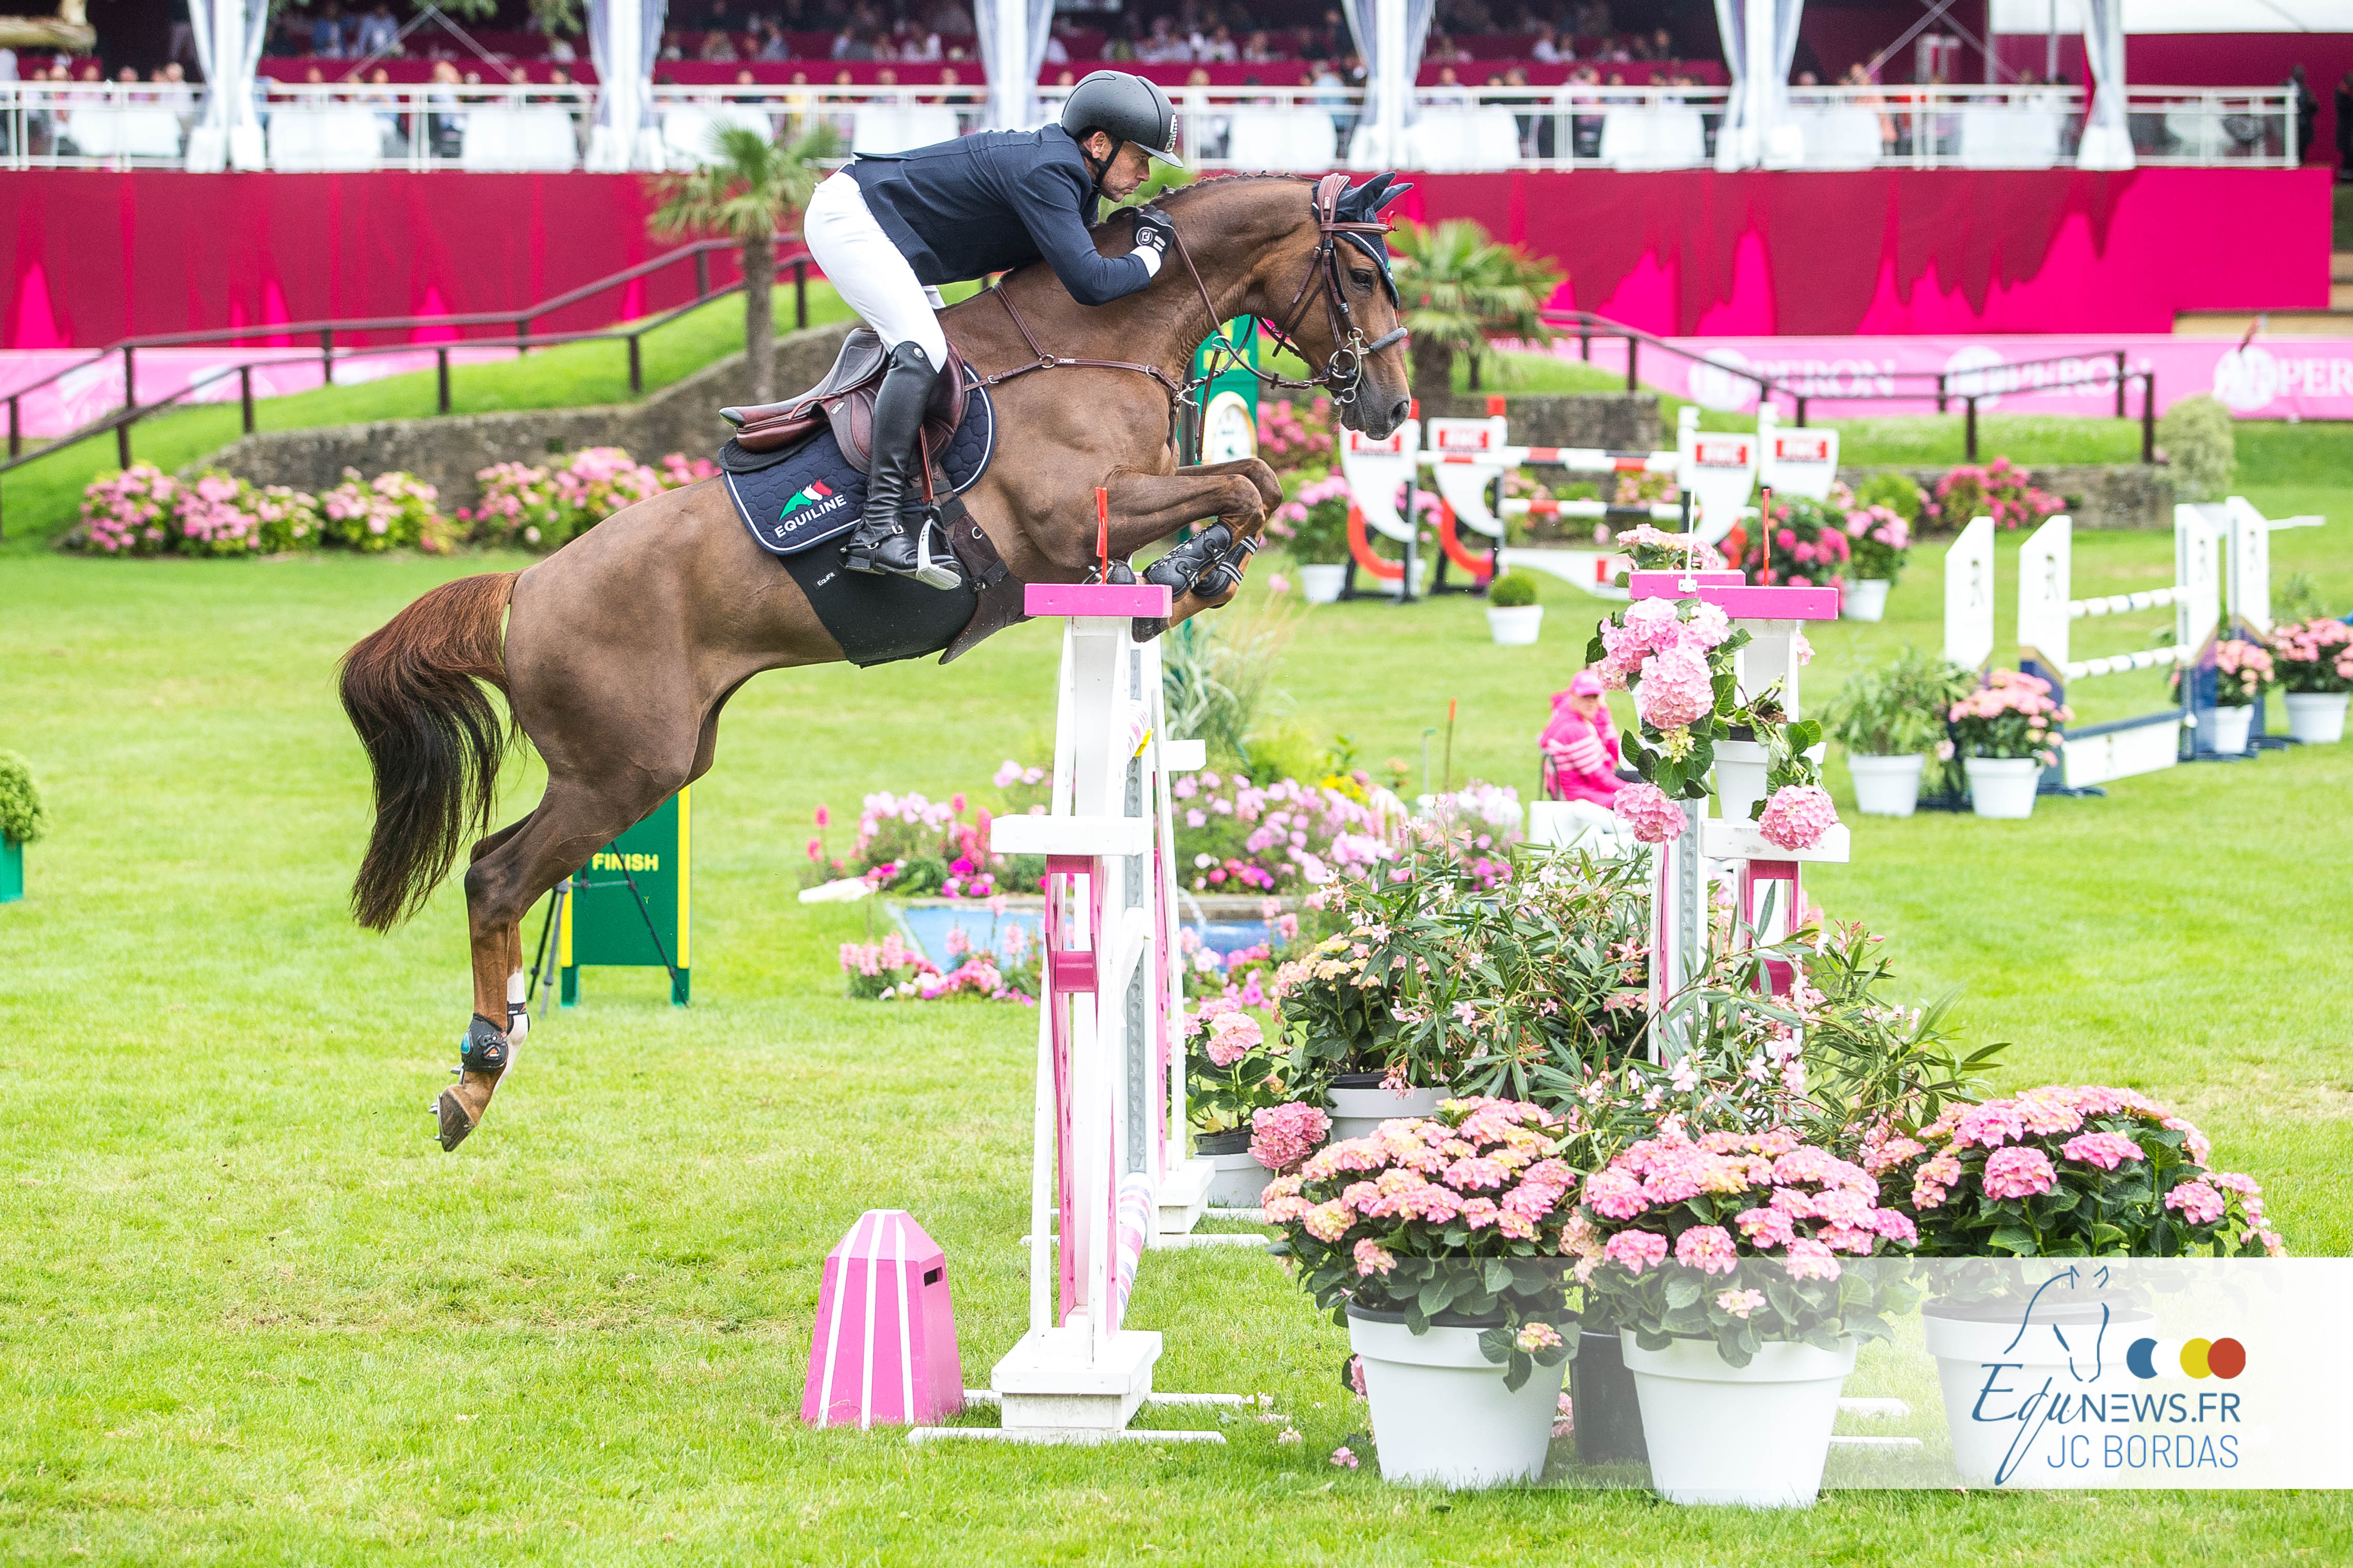 No rain keeping Conor Swail from winning in CSI5* competition Dinard